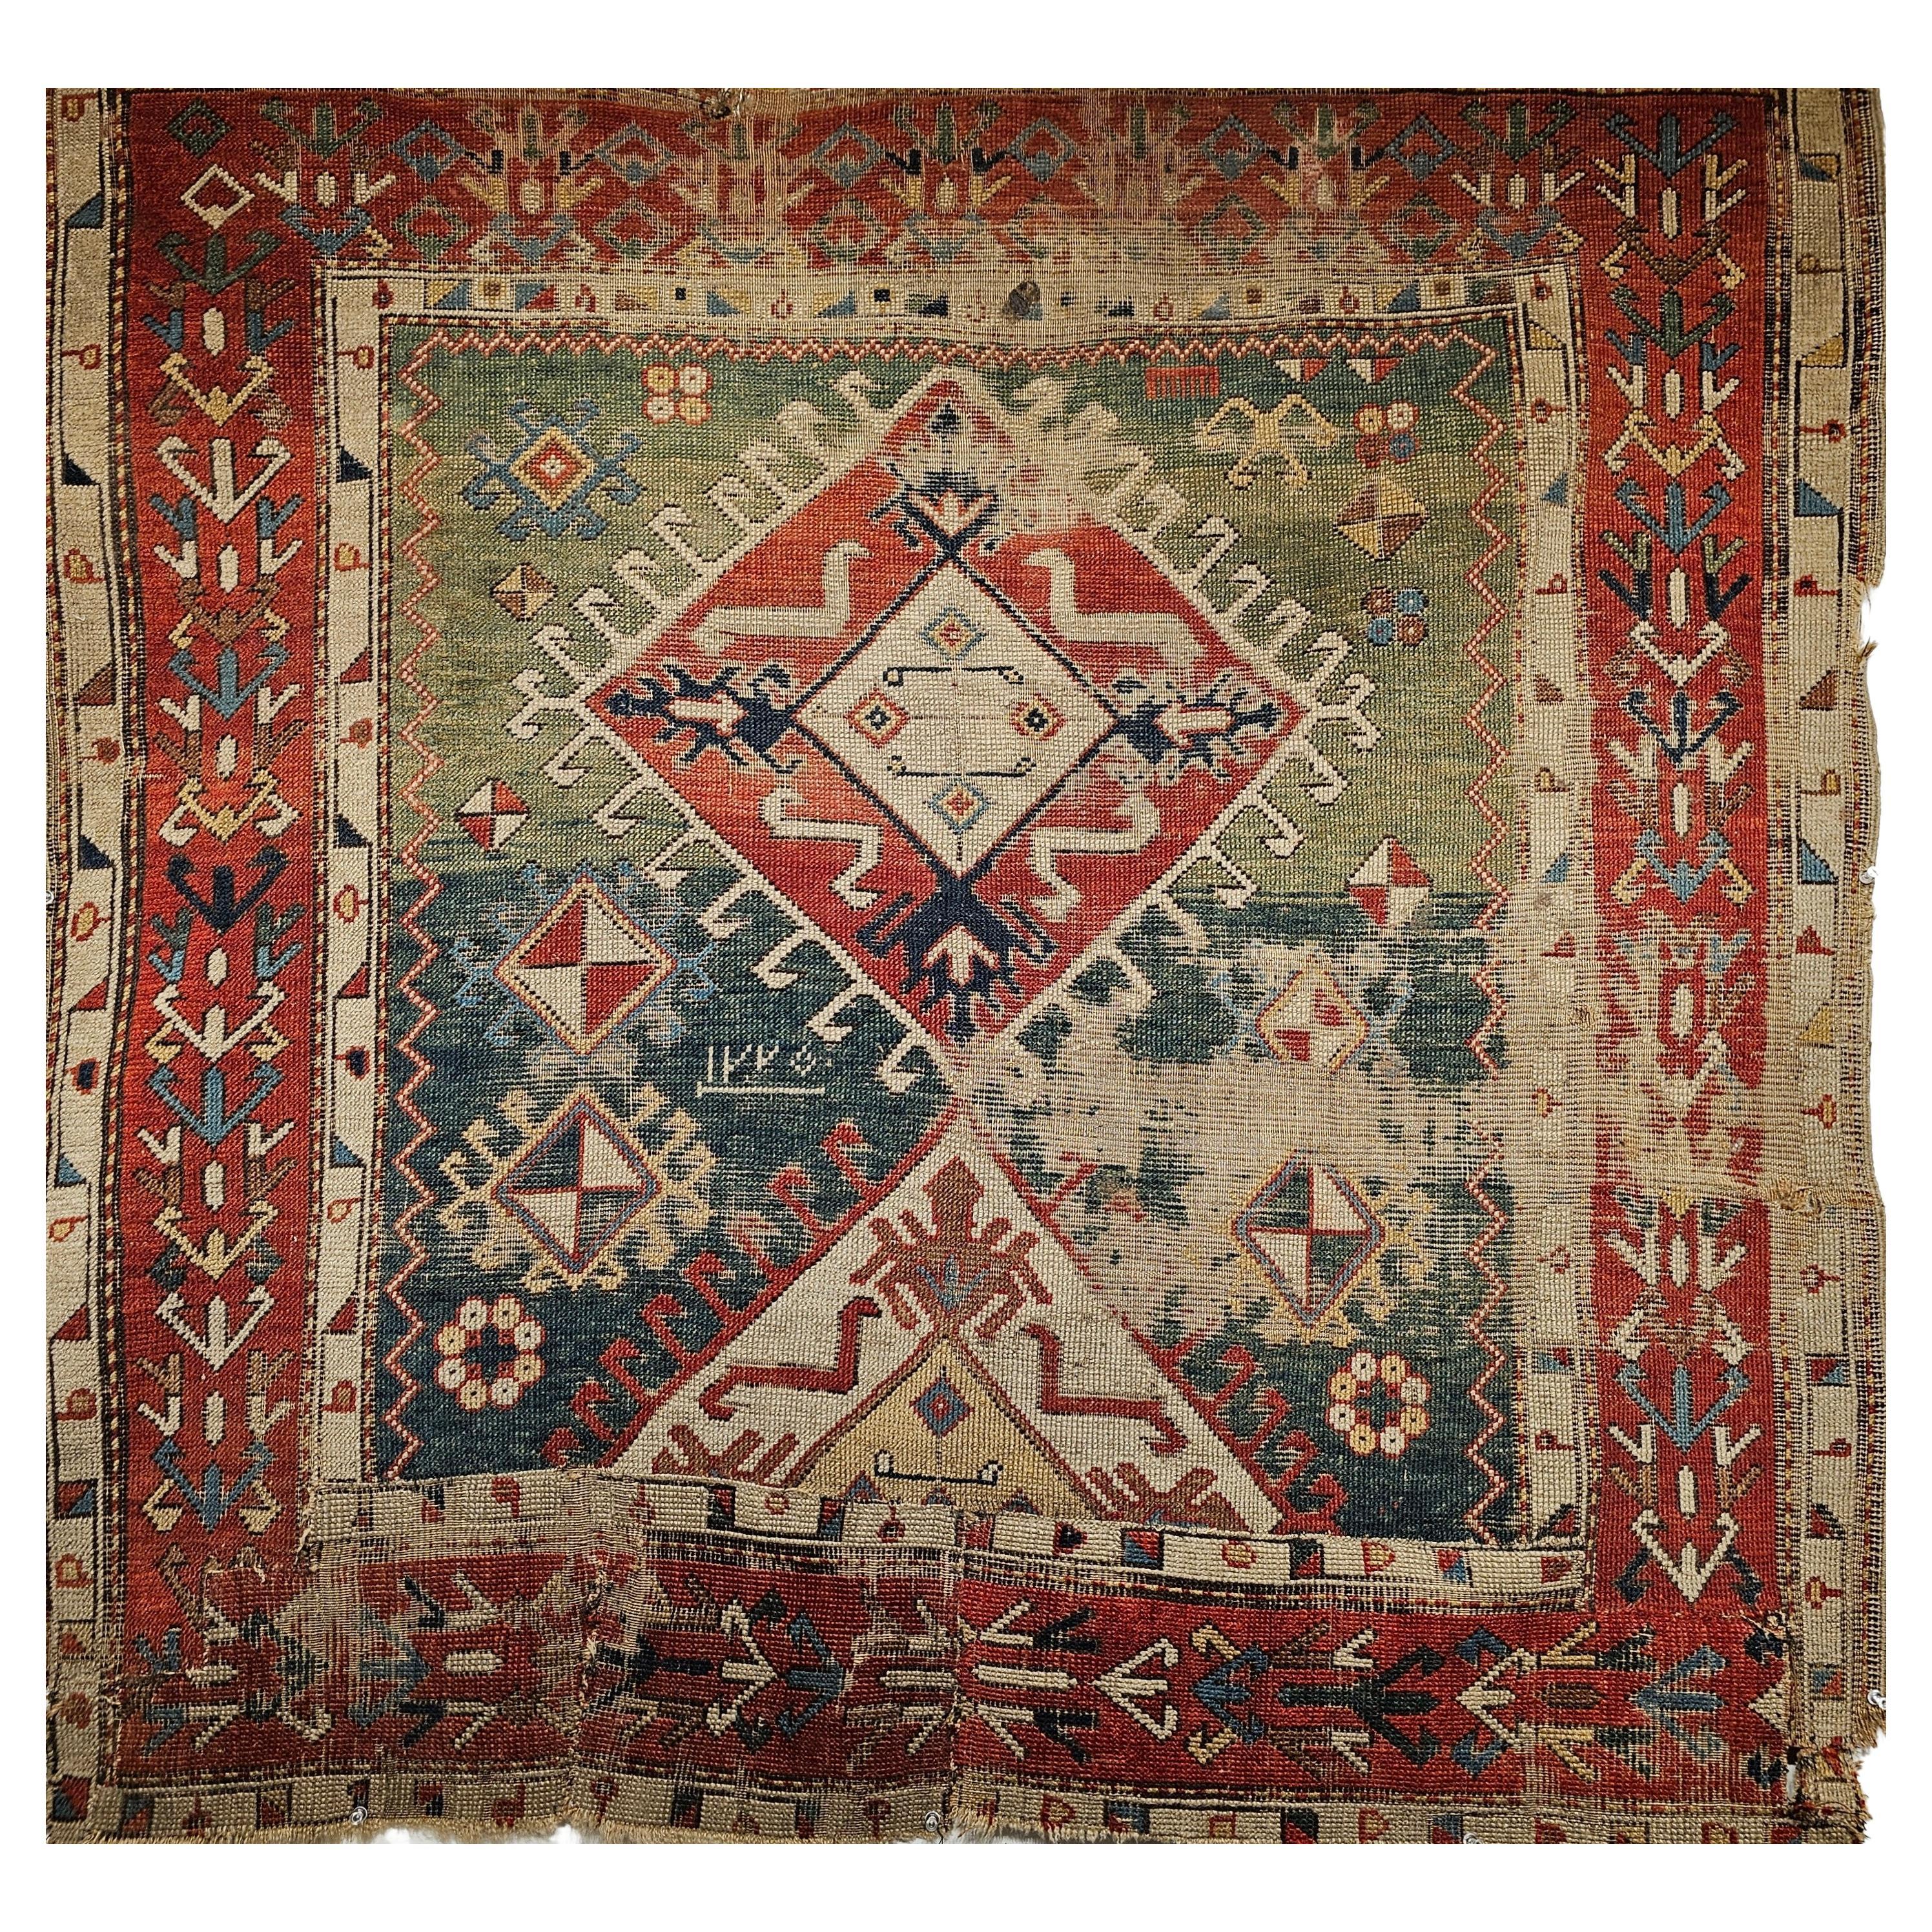 Early 19th century Caucasian Shirvan square area rug in an abrash green, blue, yellow, and red. The Caucasian Shirvan rug is from the 1st/2nd quarter of the 1800 and and the date is woven in the rug.  Looking at the date in the center of the rug